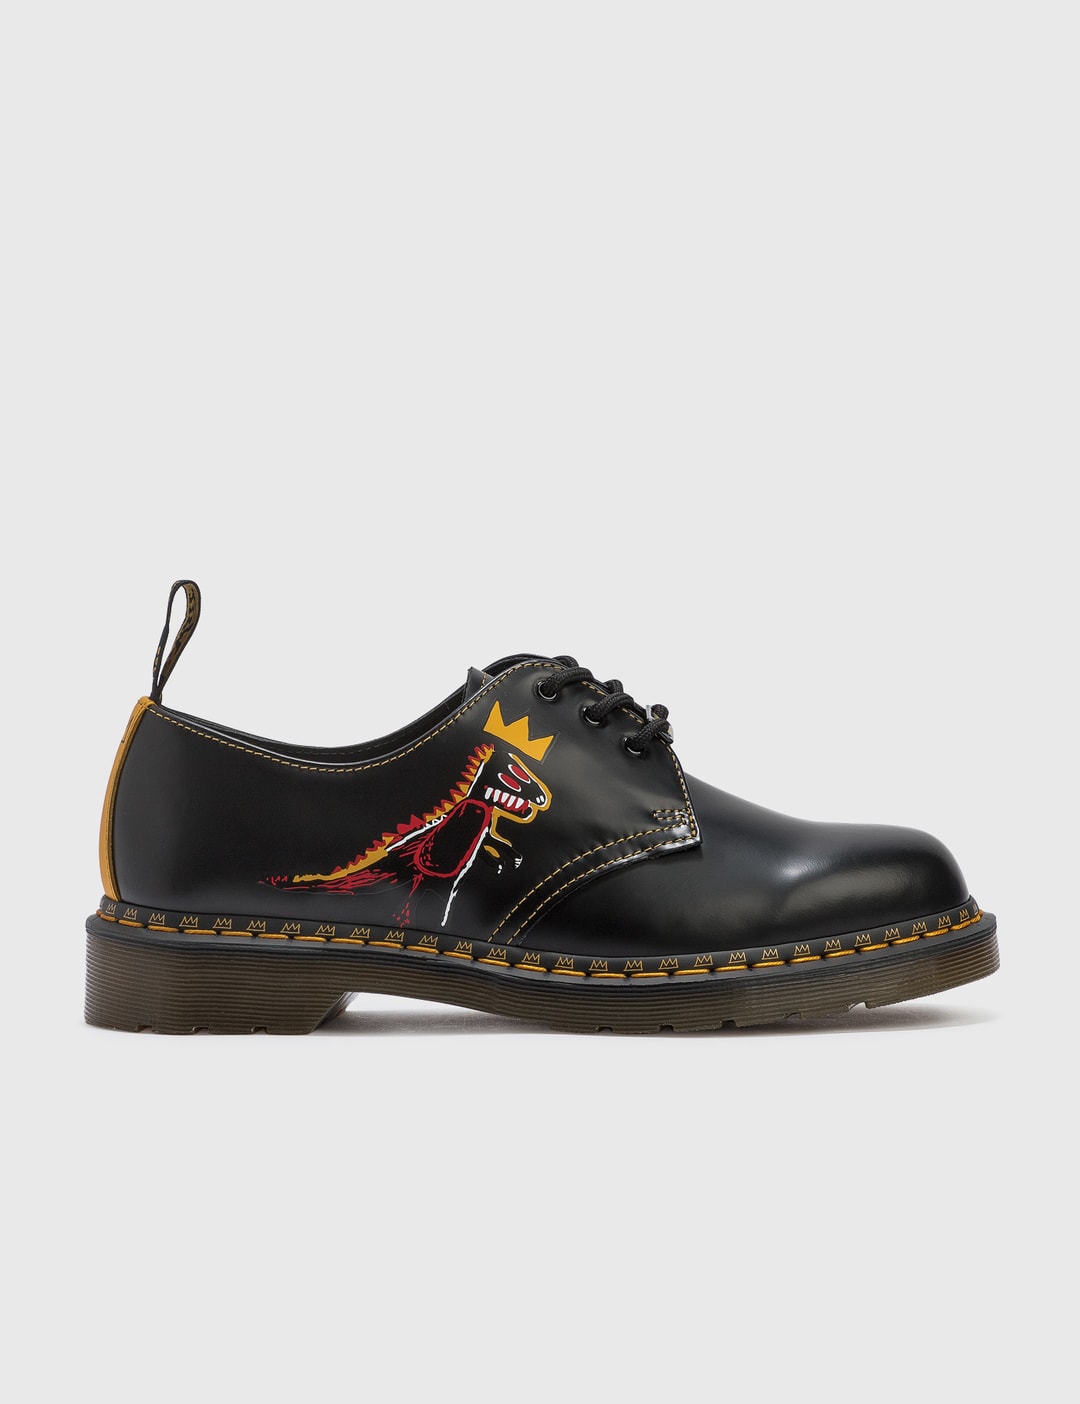 Dr. Martens - Dr. Martens x Jean-Michel Basquiat 1461 Oxford | HBX - Globally Curated Fashion